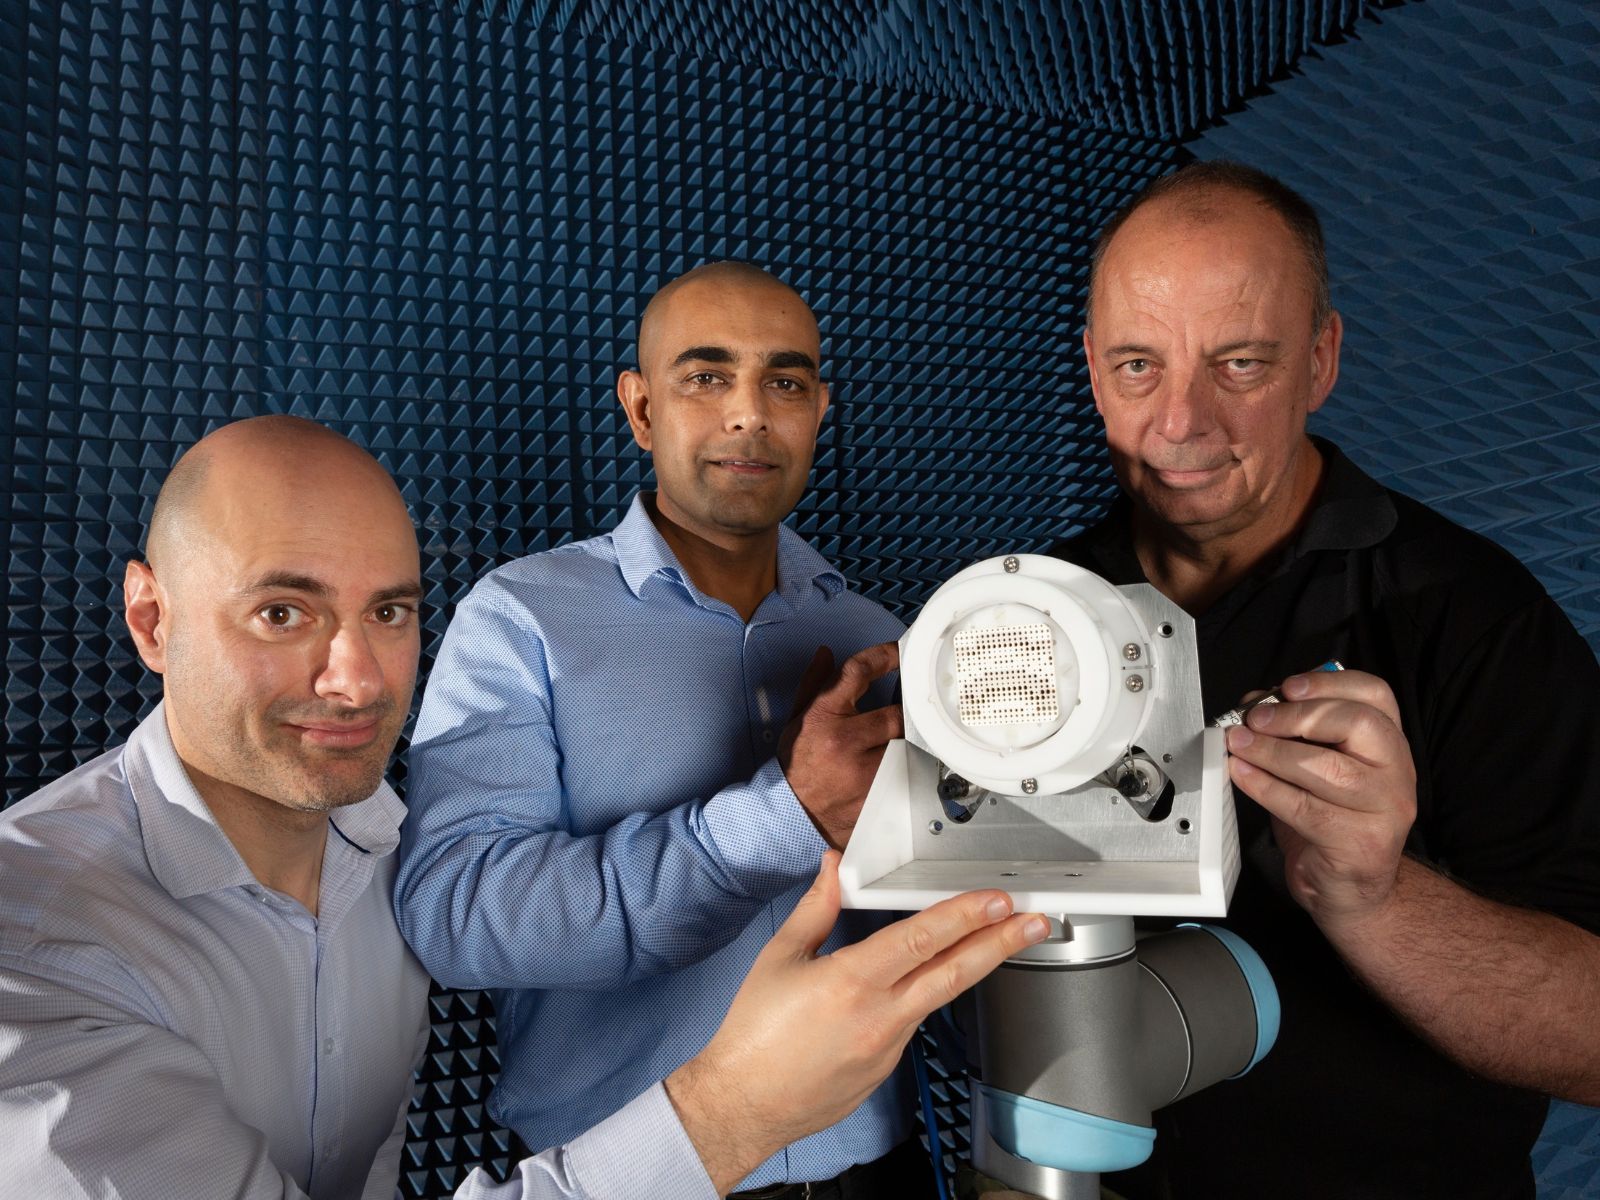 (L-R) Daniel Borg, Dr Manik Attygalle and David Burdon from the MetaSteerers team, showing their award winning low-profile, energy-efficient and steerable antenna system. The MetaSteerers antenna system uses metasurfaces to steer radio frequency signals over a wide area at very high speeds.